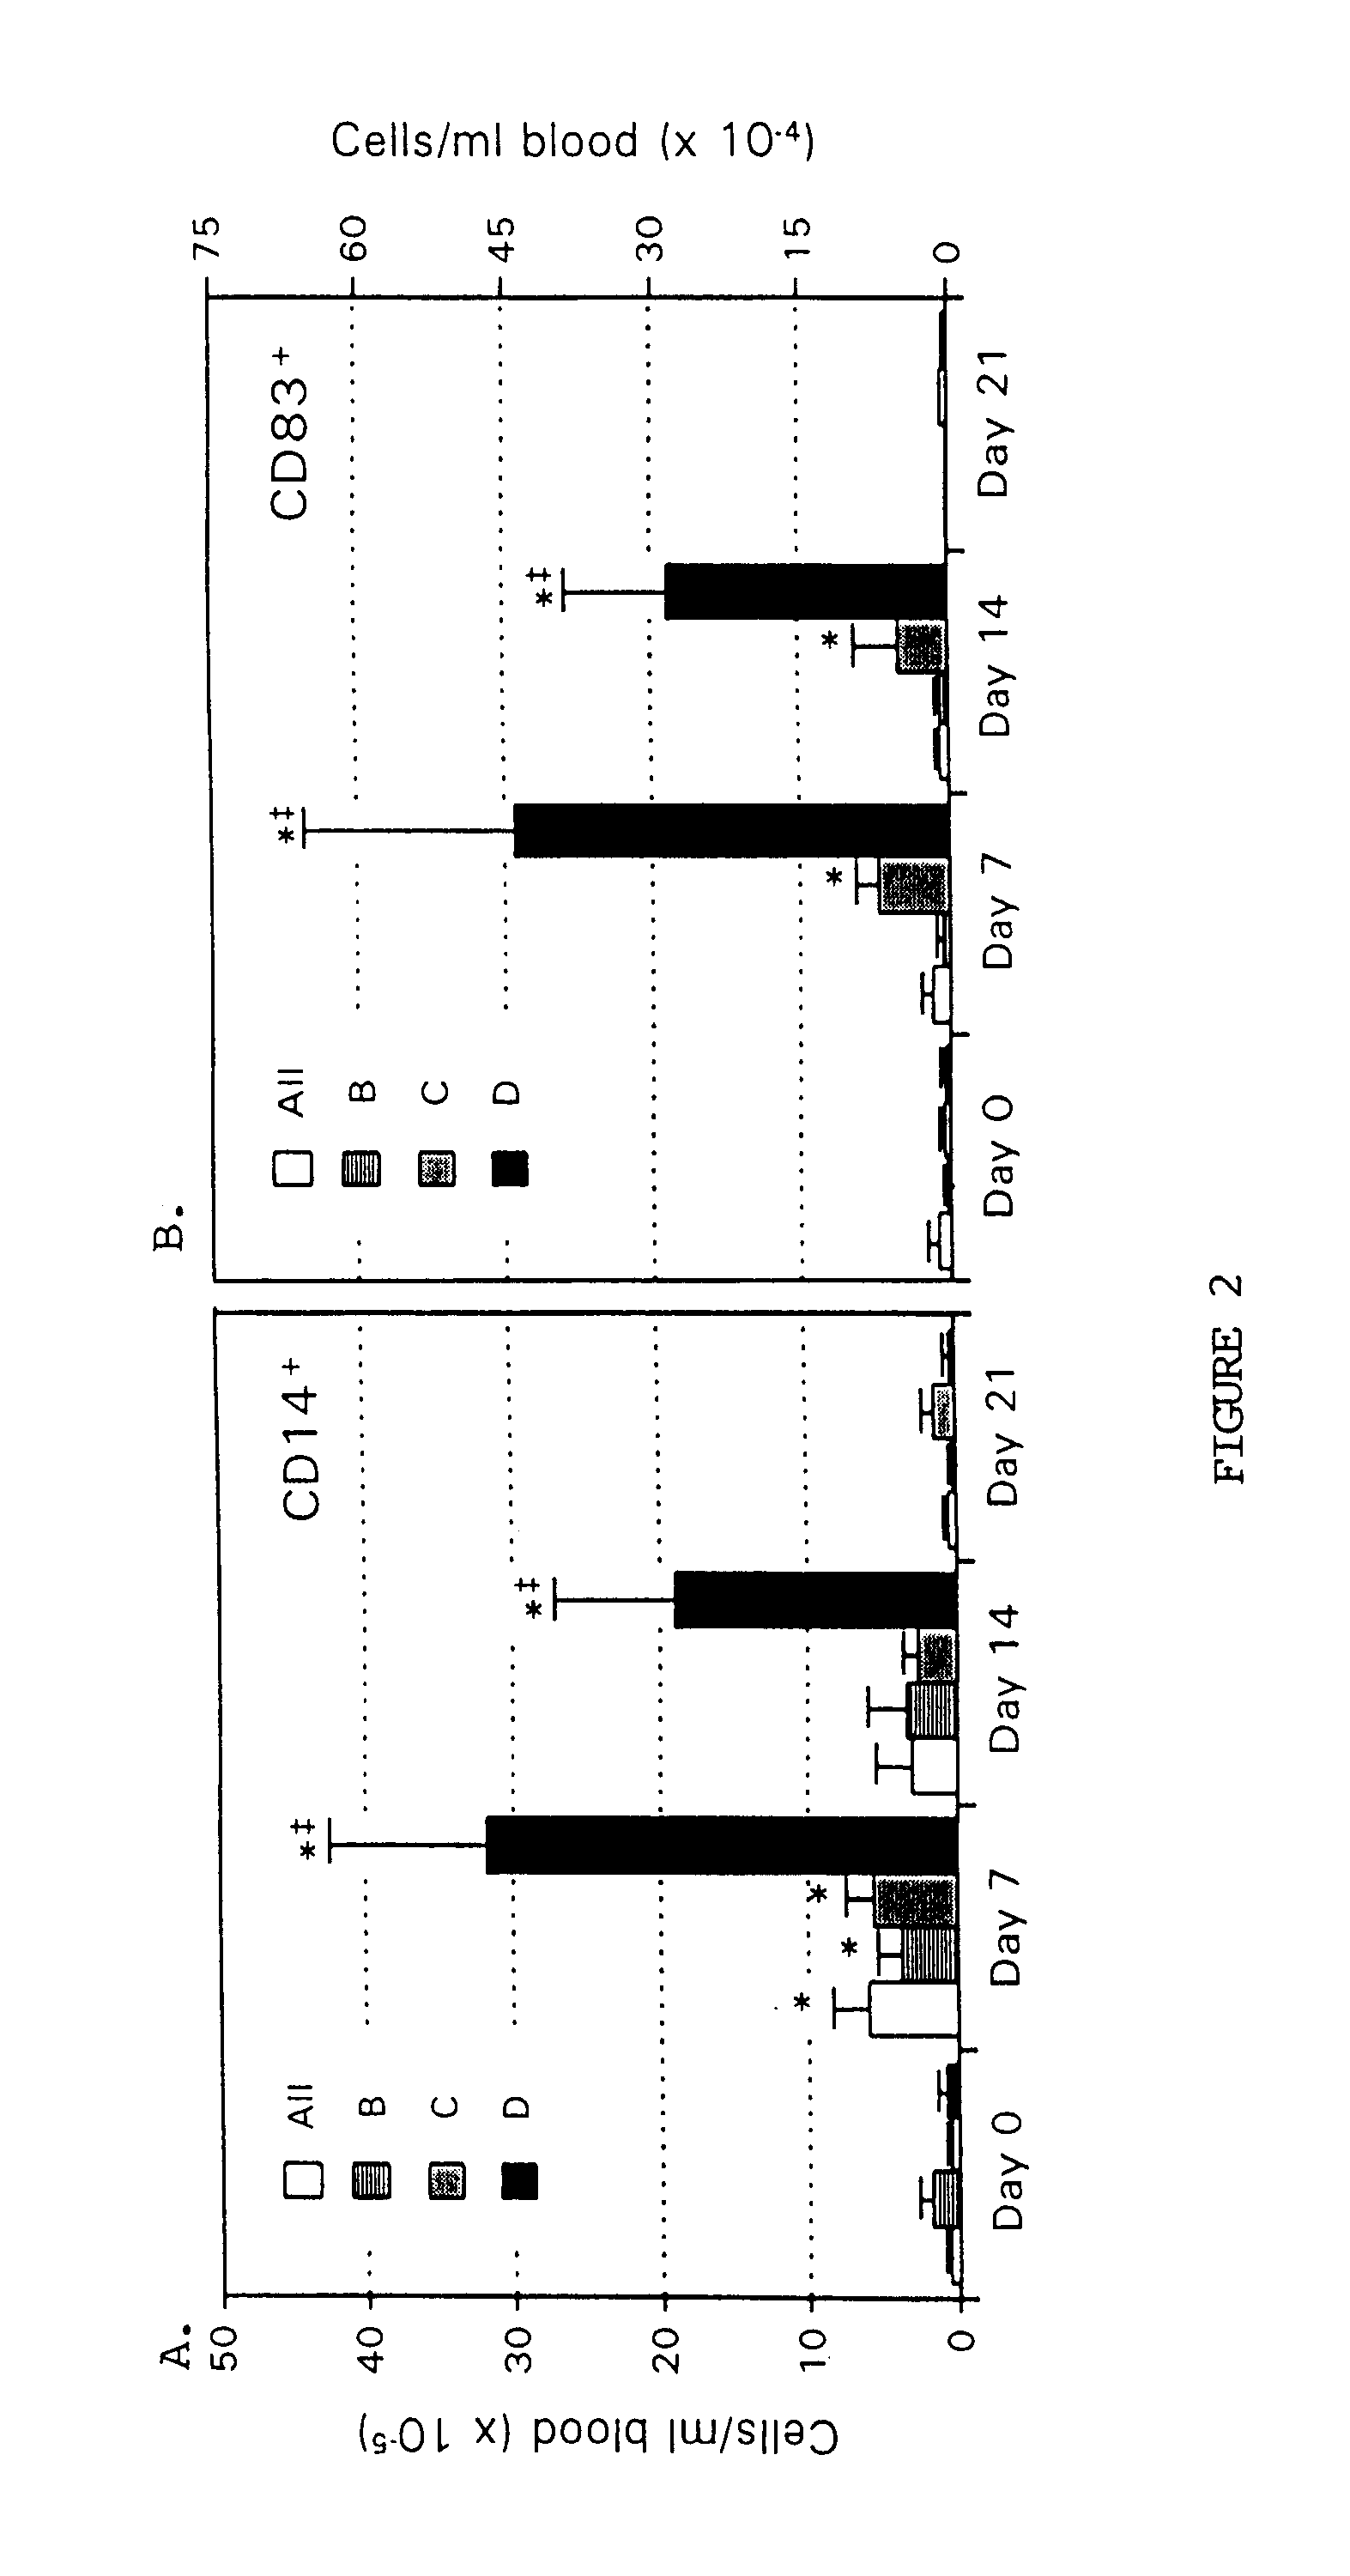 Methods for enhancing antigen-presenting cells and anti-tumor responses in a human patient